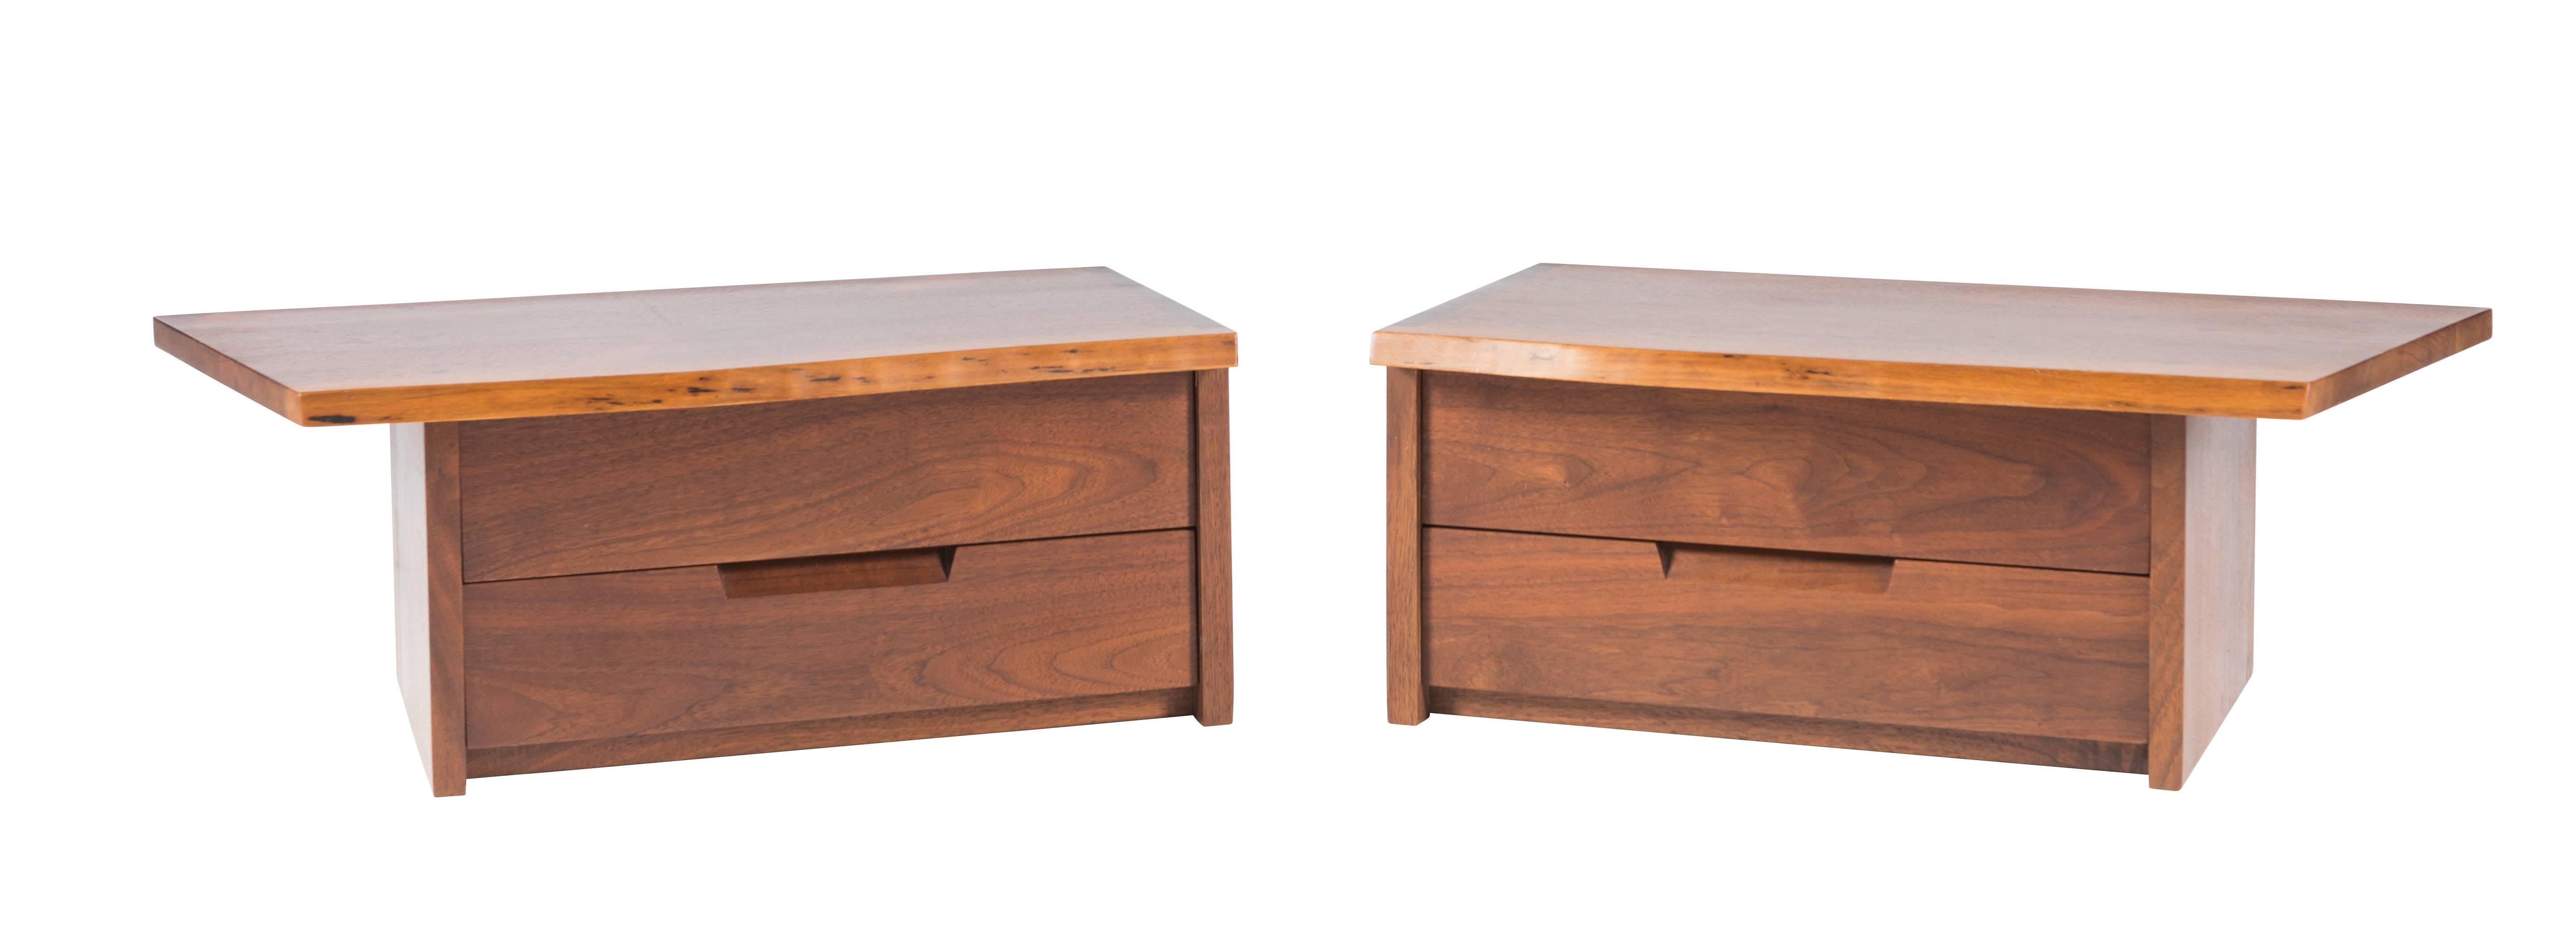 Exceptional and very rare pair of black walnut wall mounted nightstands or bedside tables. Cases with free-edge fronts, over-hang left and right and dovetailed at square ends. Each case with two drawers. Comes with letter of Provenance, circa 1963.